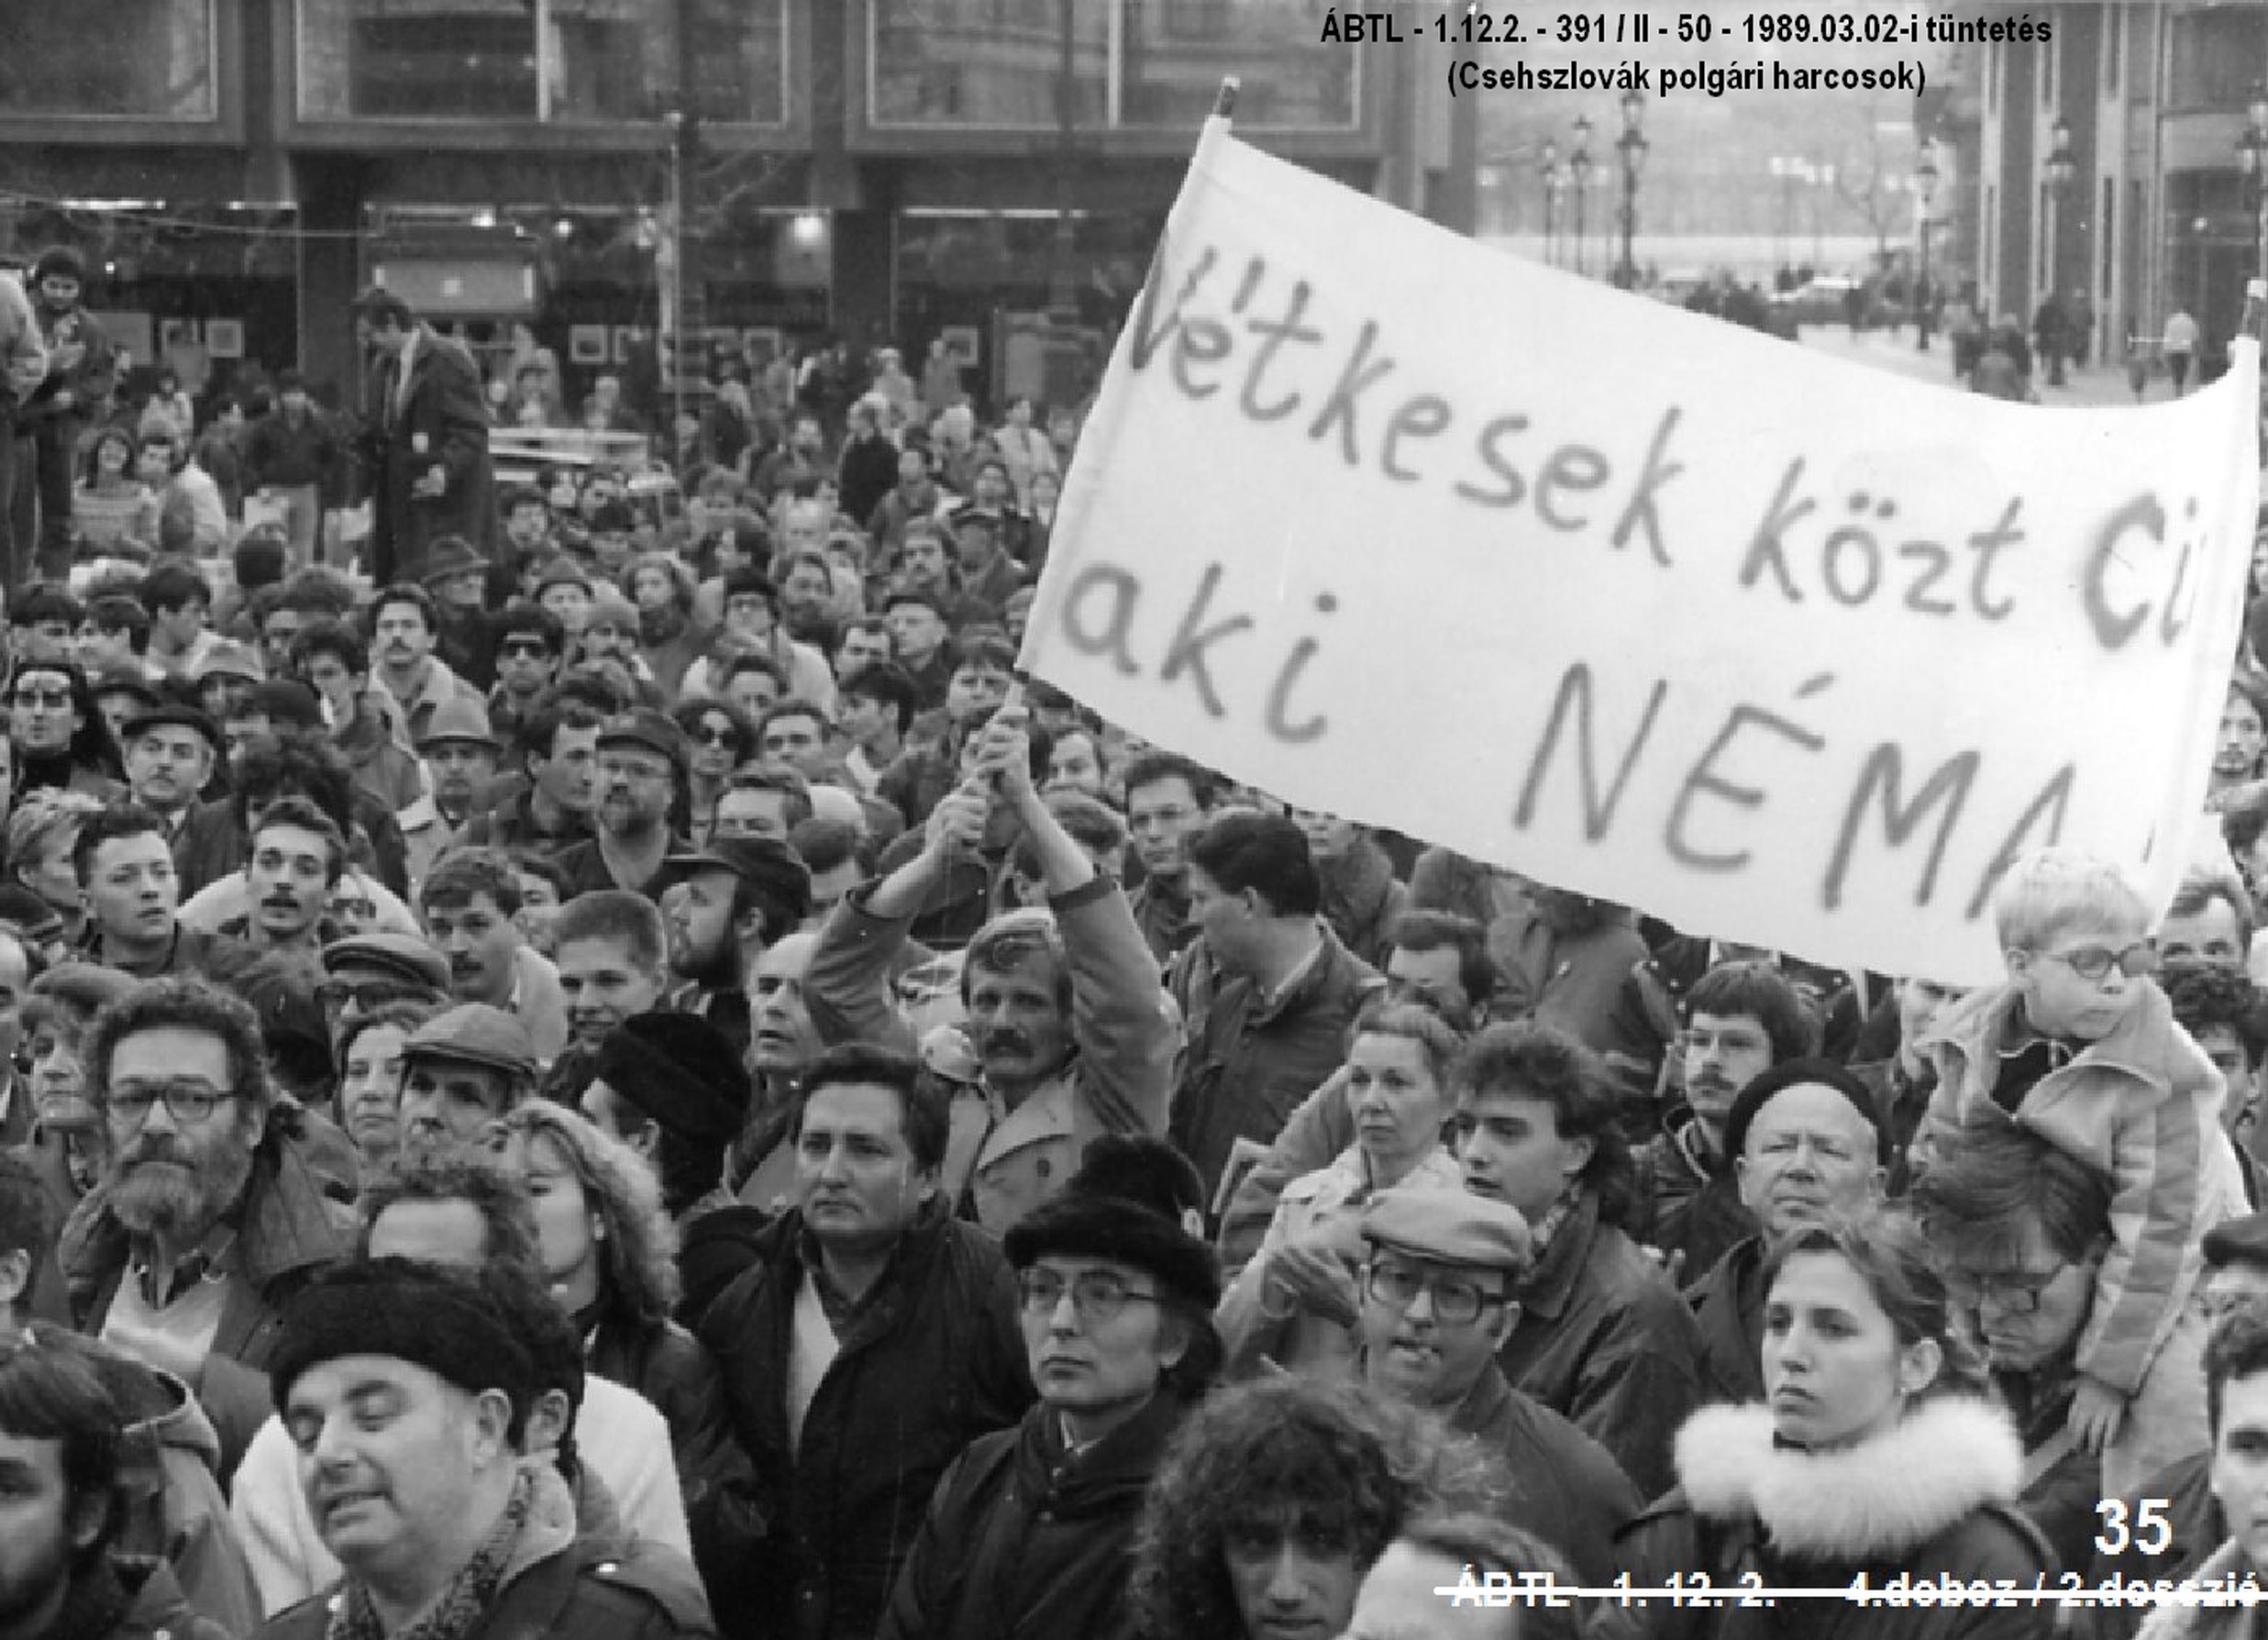 State security photo about the „Protest against the persistent imprisonment of civil activists” (2. March 1989.)